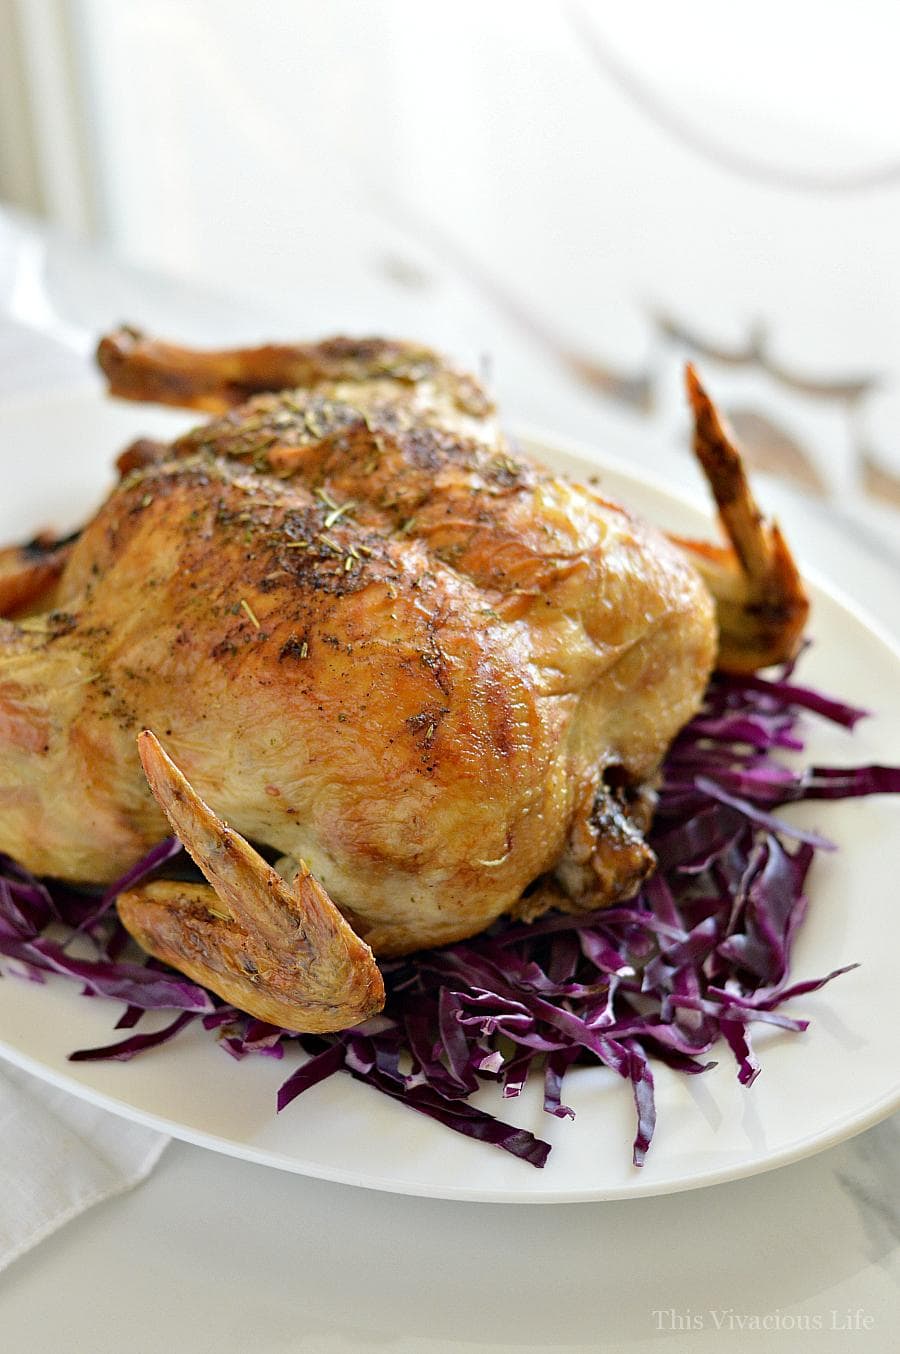 Dutch oven roast chicken on a bed of red cabbage